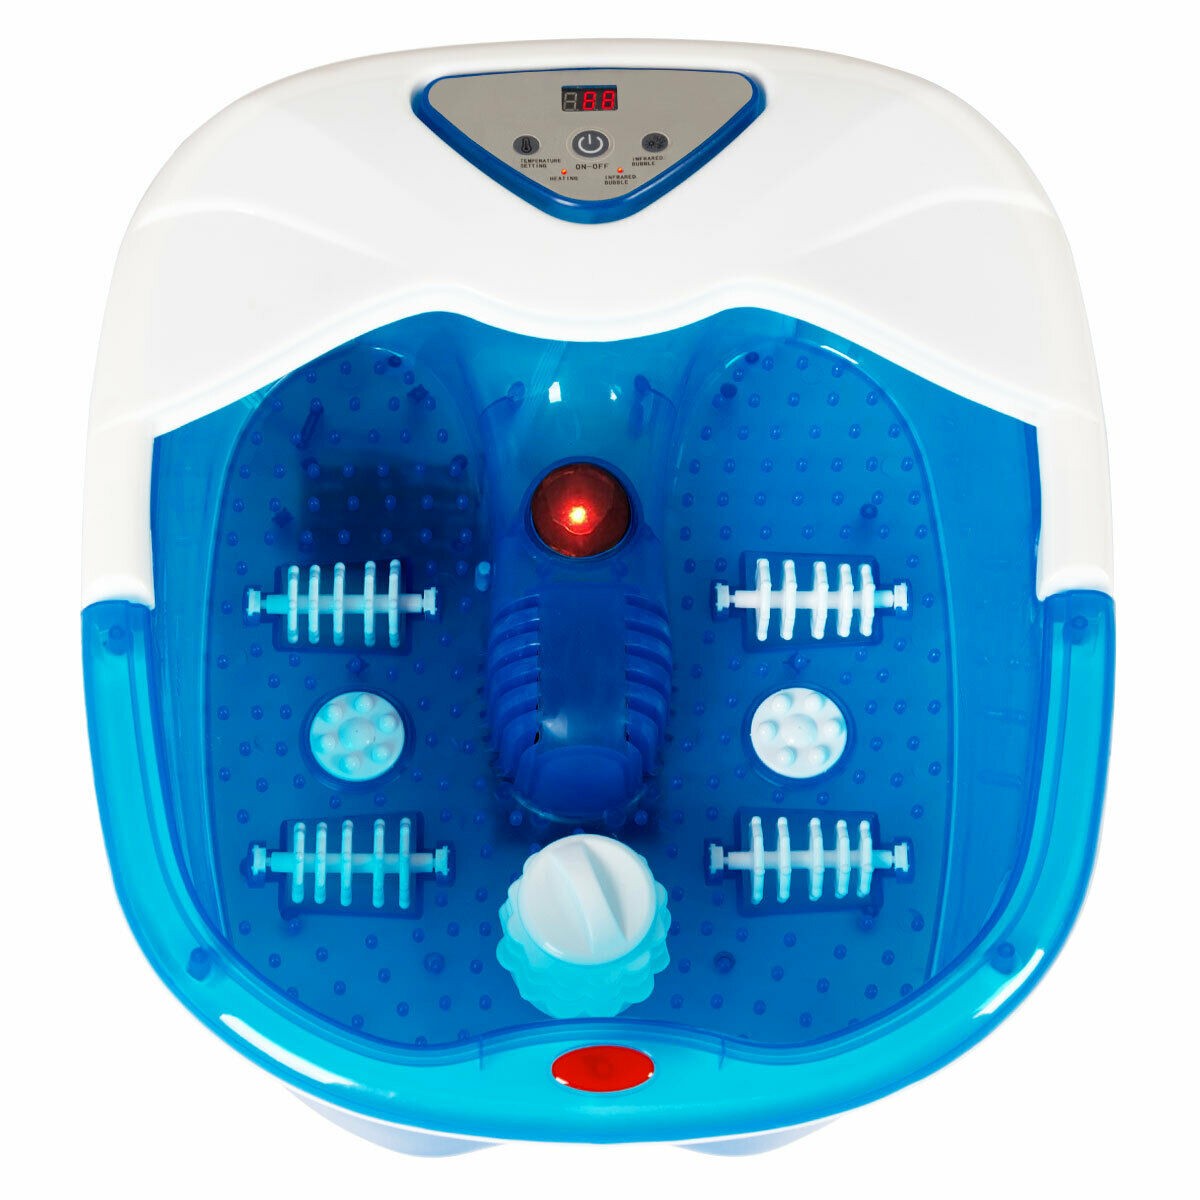 Temperature Control Foot Spa Bath Massager With LCD Display